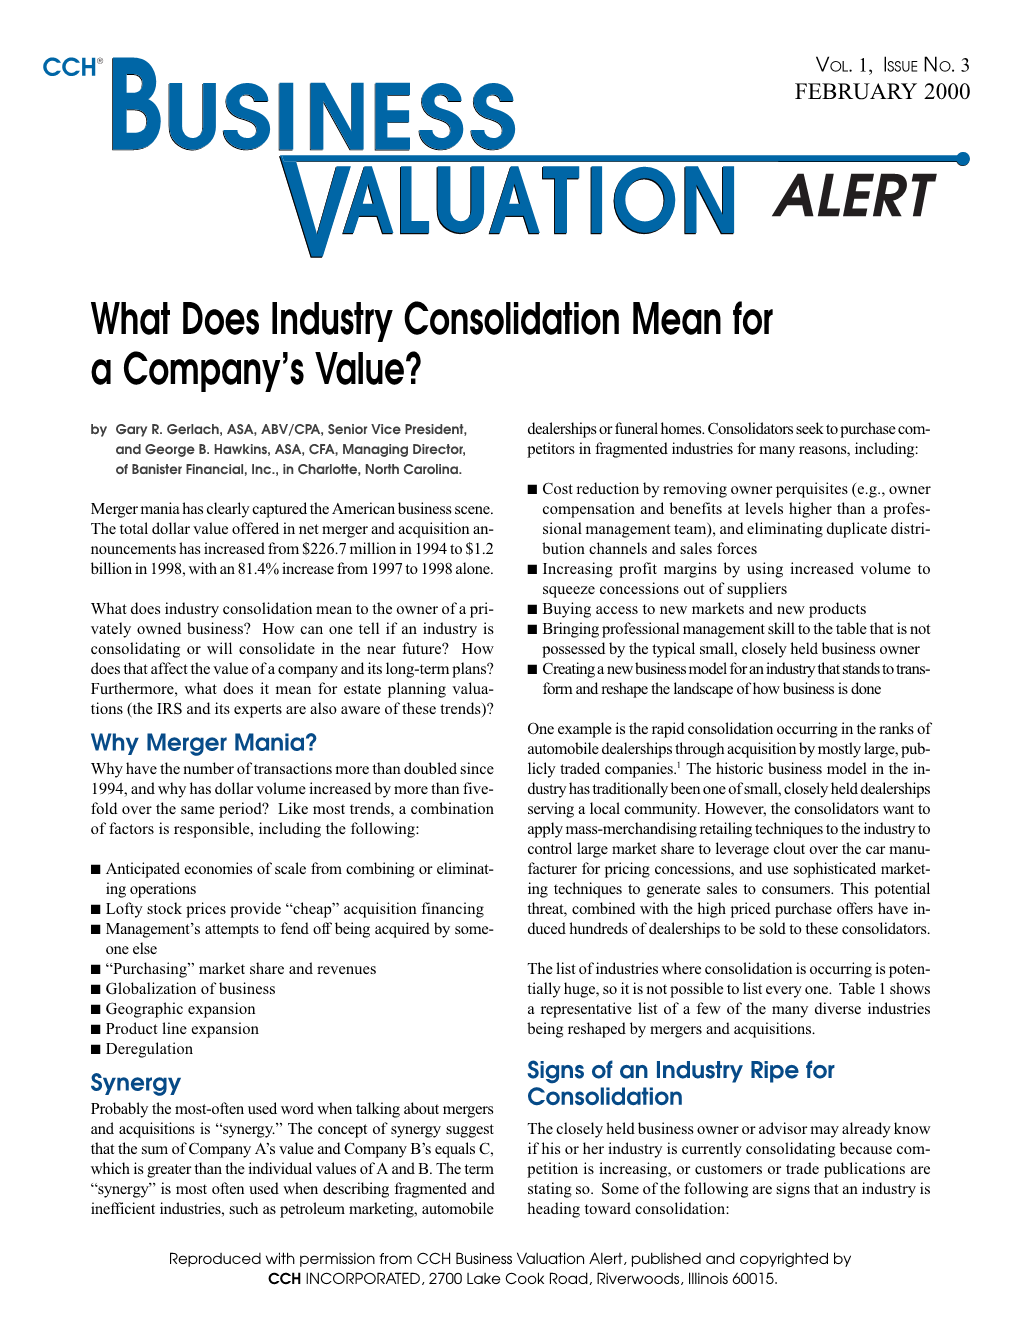 What Does Industry Consolidation Mean for Your Company's Value?